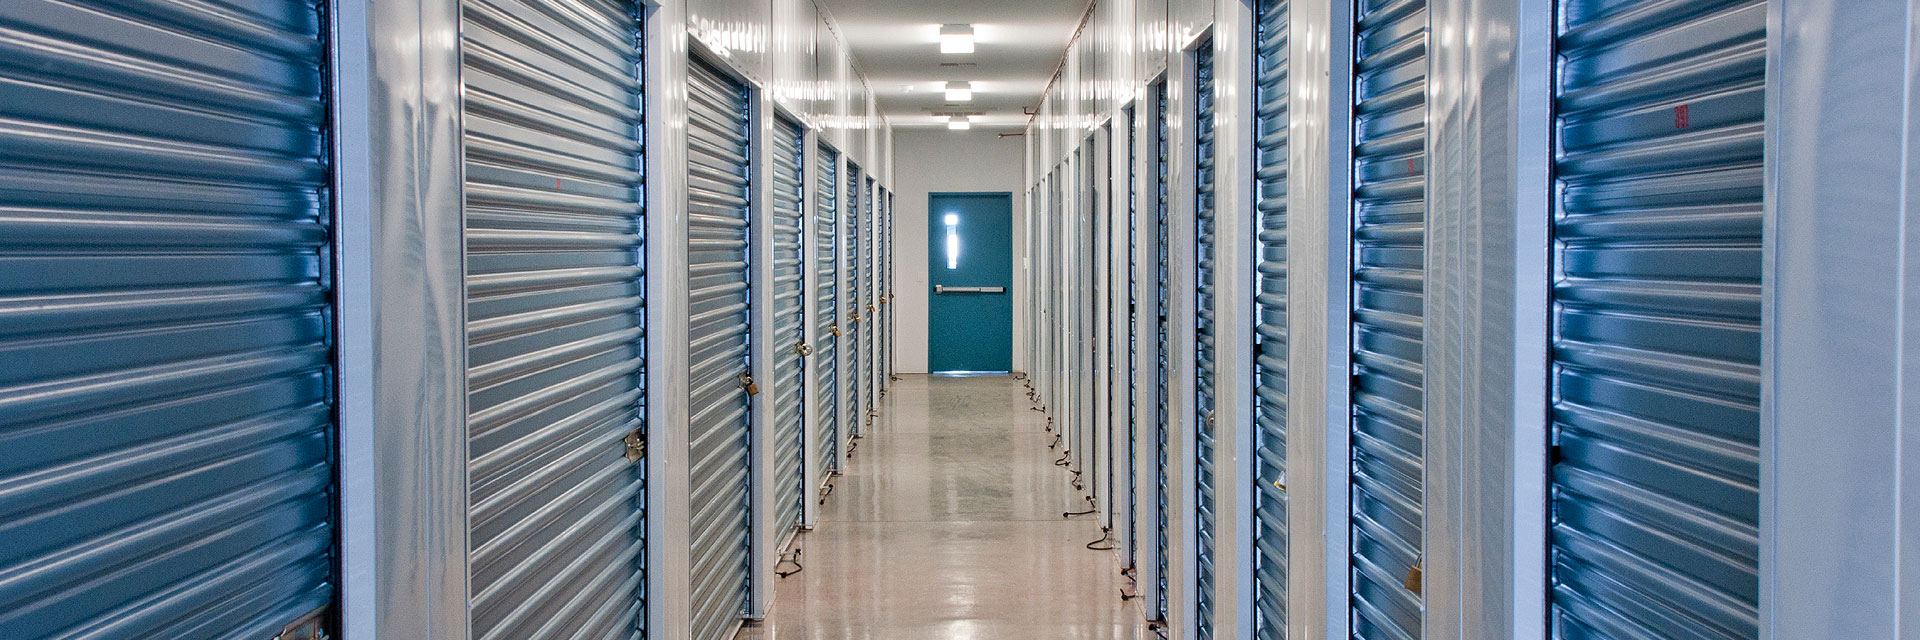 Find a self-storage broker in your area.